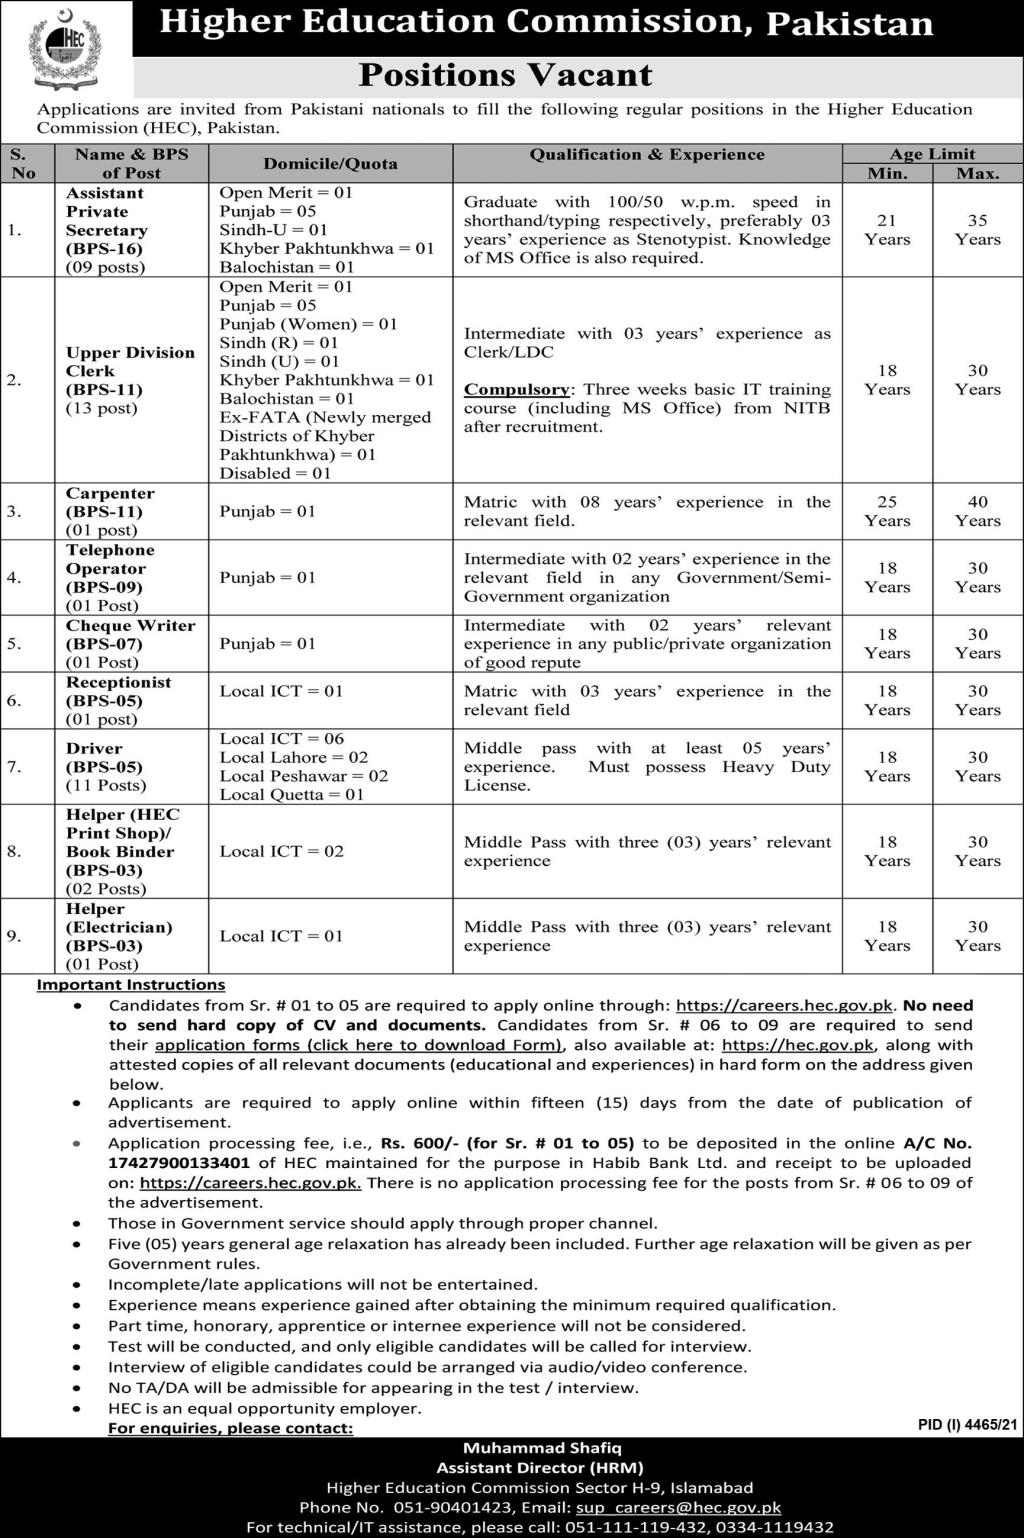 Higher Education Commission HEC Islamabad Jobs 2022 | Online Application